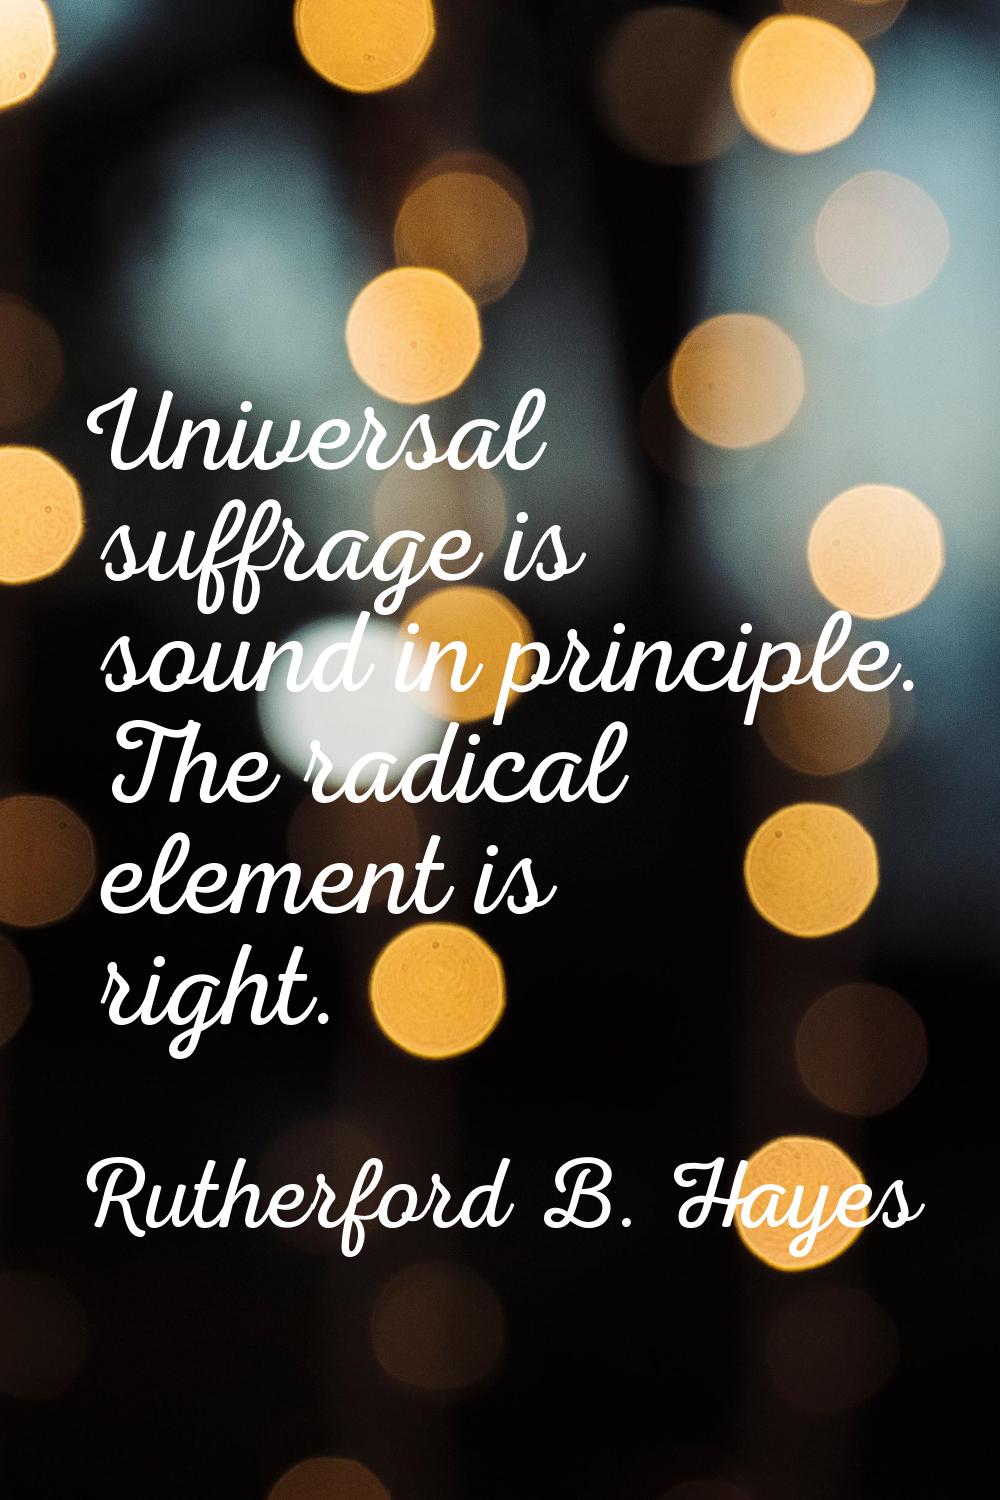 Universal suffrage is sound in principle. The radical element is right.